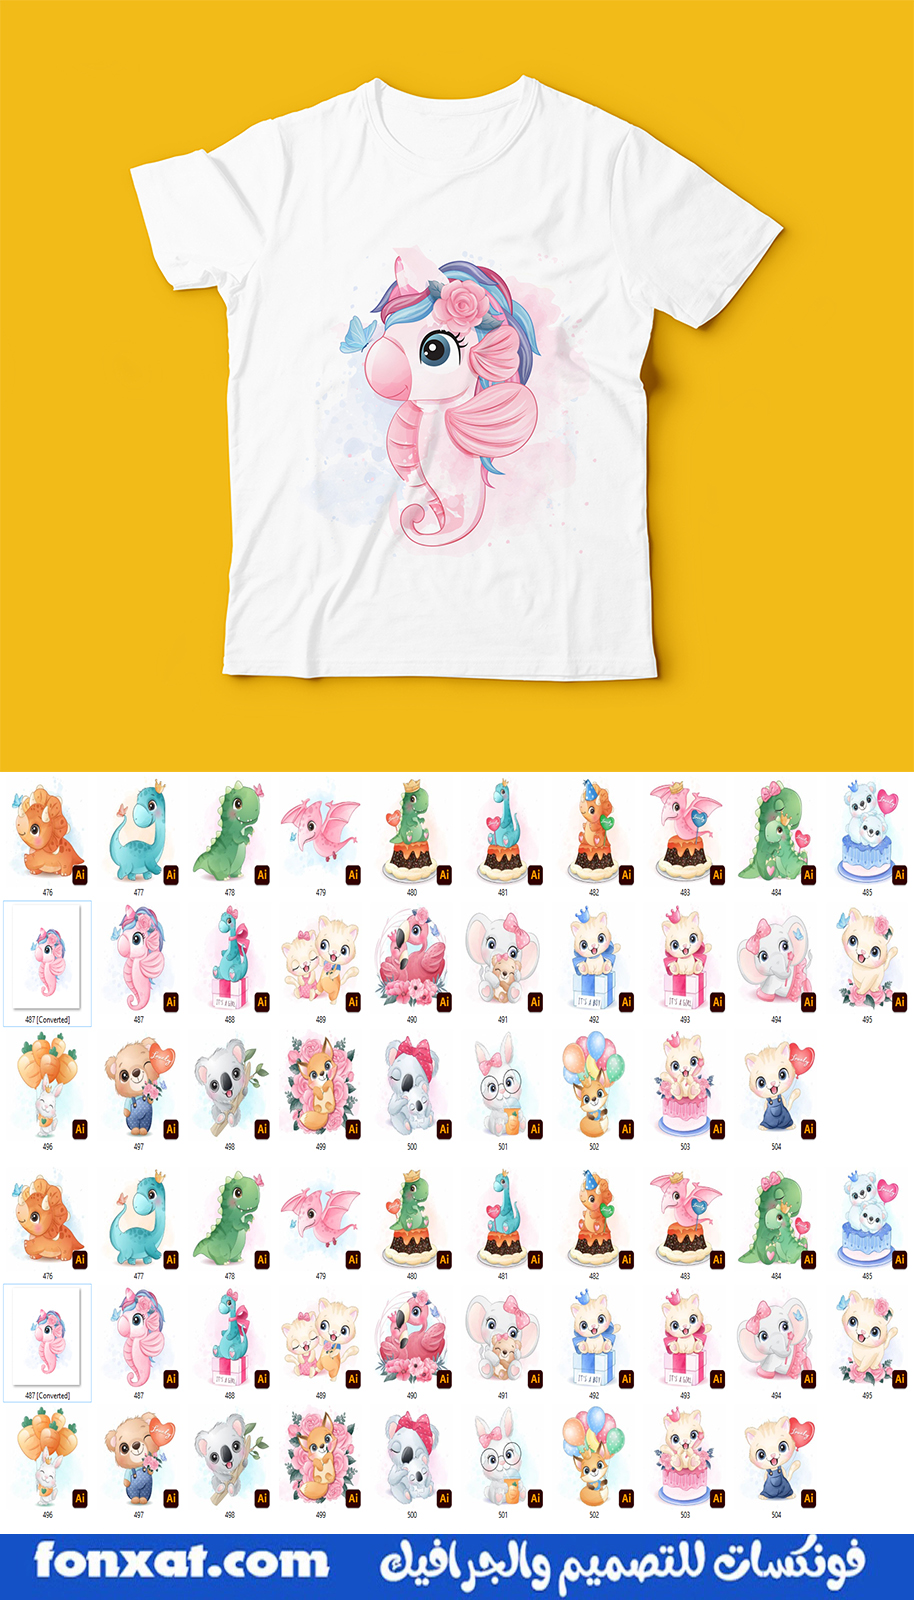 Vector designs of the highest quality for printing on kids' t-shirts, gorgeous 3D cartoon shapes